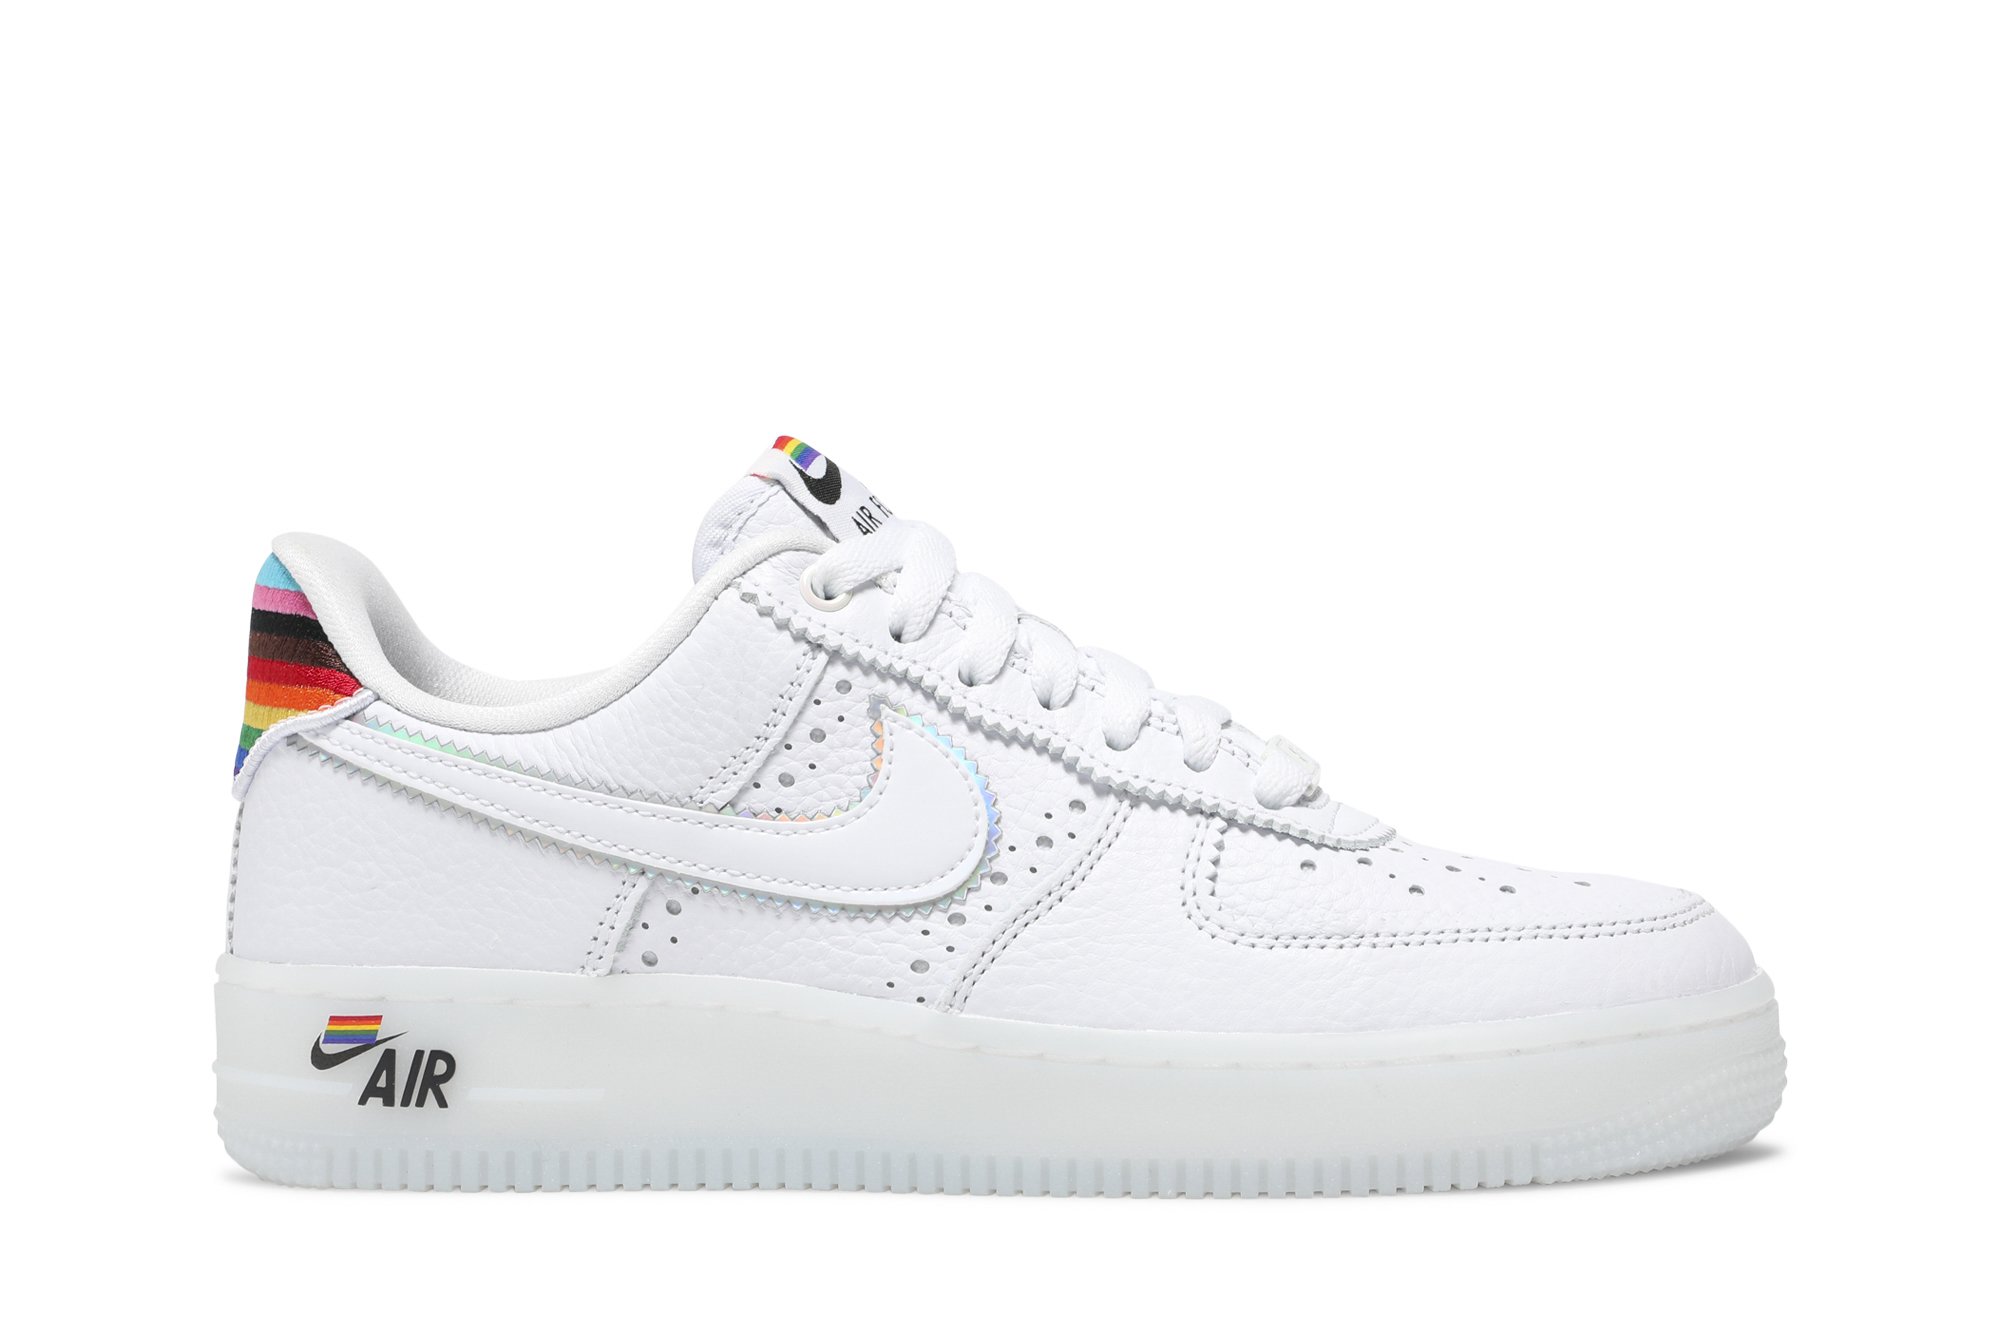 Air Force 1 Low 'Be True' | GOAT